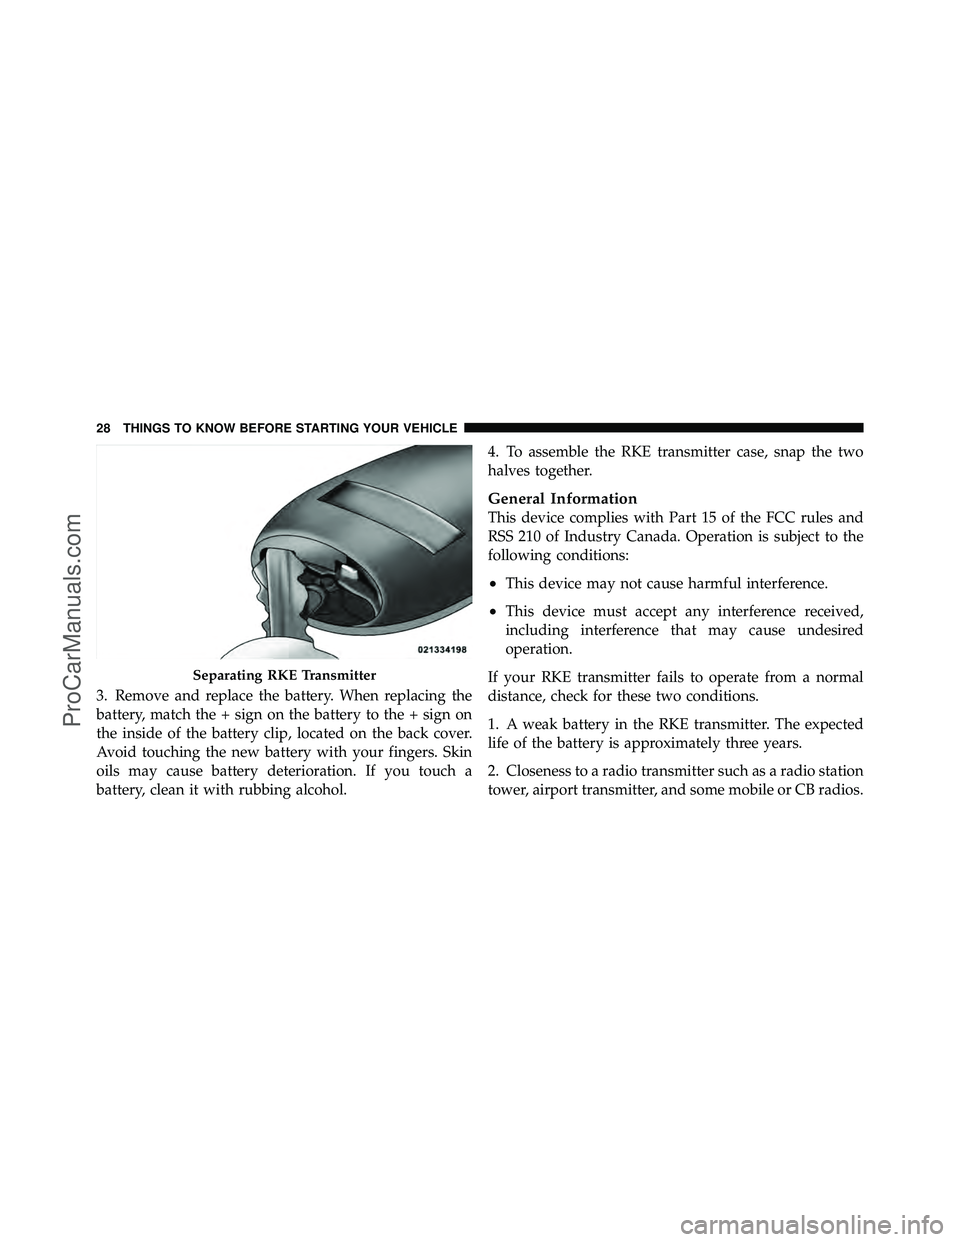 DODGE CARAVAN 2012  Owners Manual 3. Remove and replace the battery. When replacing the
battery, match the + sign on the battery to the + sign on
the inside of the battery clip, located on the back cover.
Avoid touching the new batter